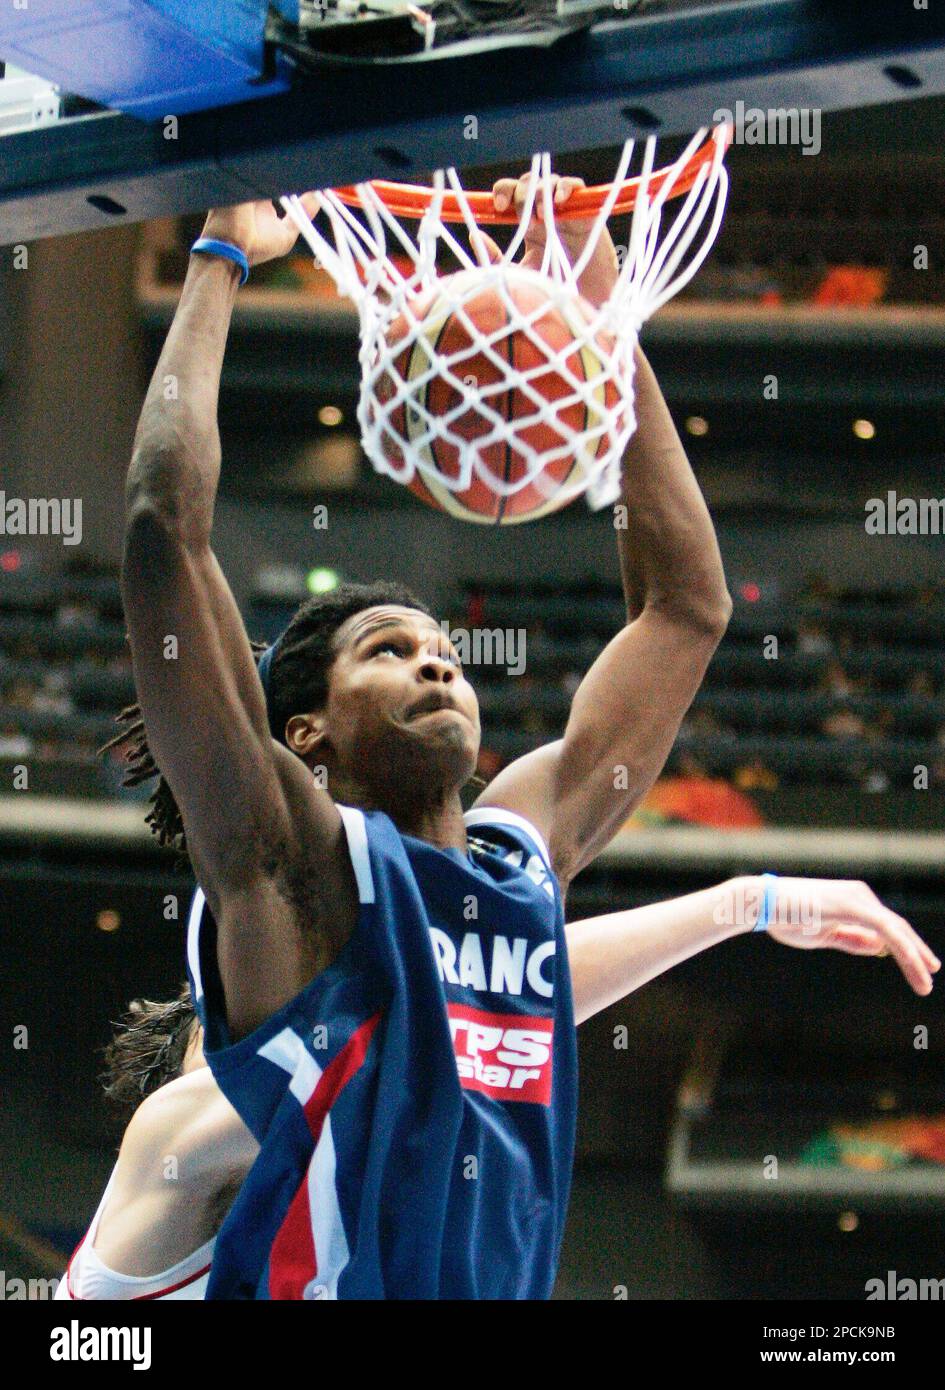 France's Mickael Gelabale (5) dunks during their game against Turkeyduring  the 5-6th place final in the World Basketball Championships in Saitama,  Japan, Saturday, Sept. 2, 2006. France won the match 64-56. (AP